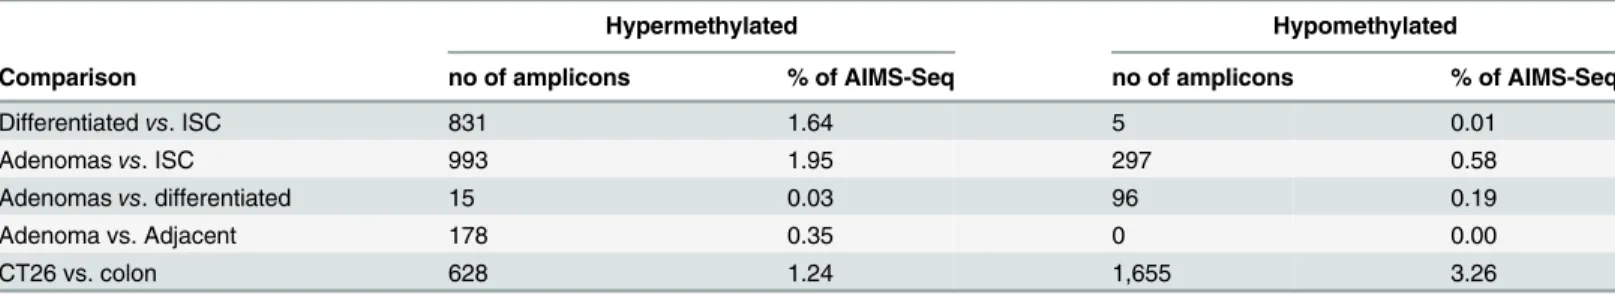 Table 1. Differentially methylated regions (DMR) as determined by AIMS-Seq during intestinal cell differentiation and transformation.